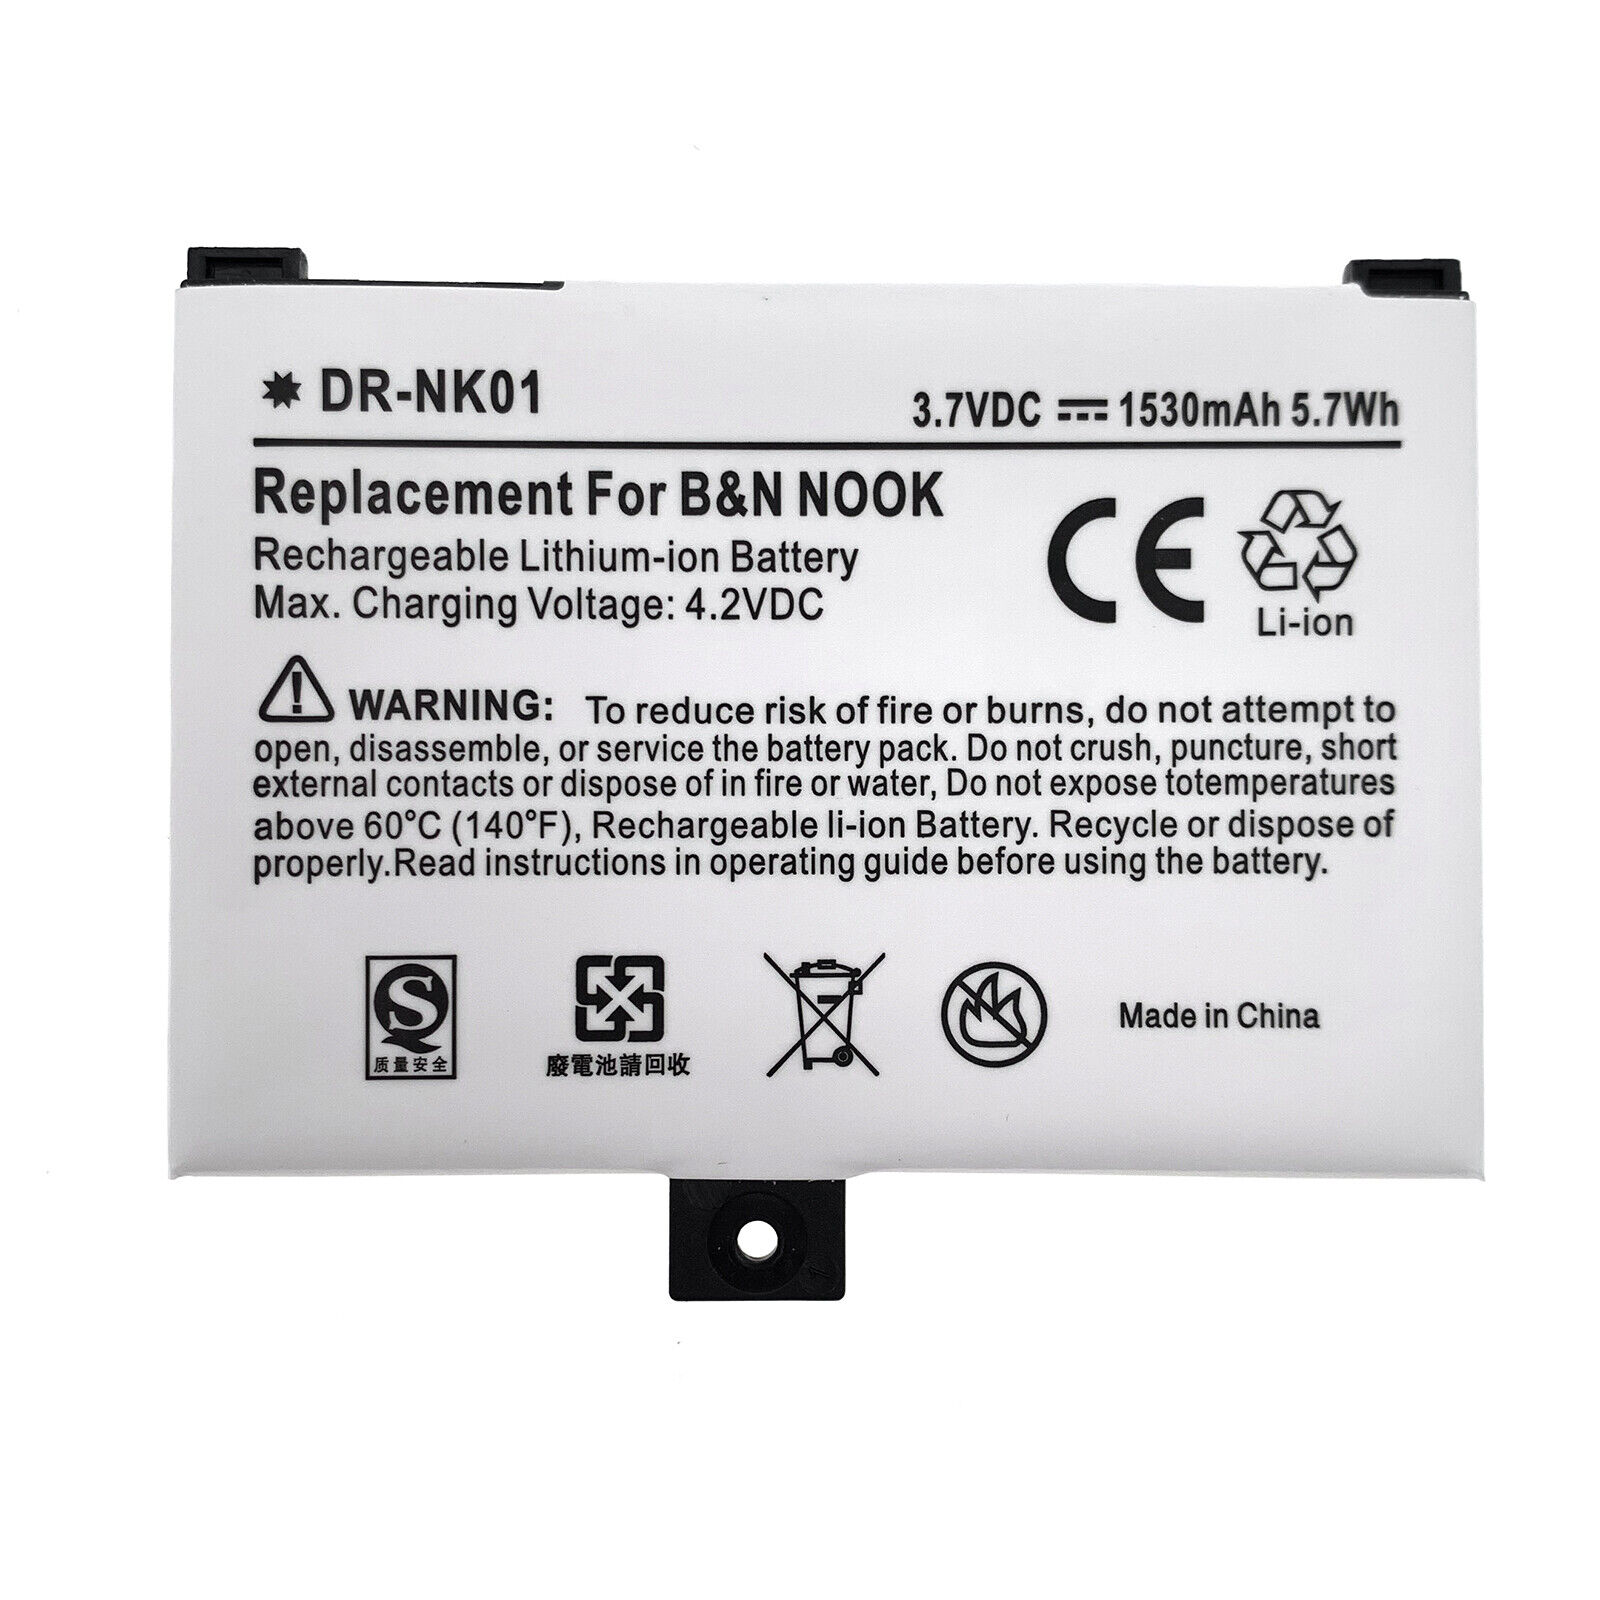 1530mAh Battery Fits For Barnes & Noble NOOK 005/ BNRZ1000/ Classic/ 1st Edition